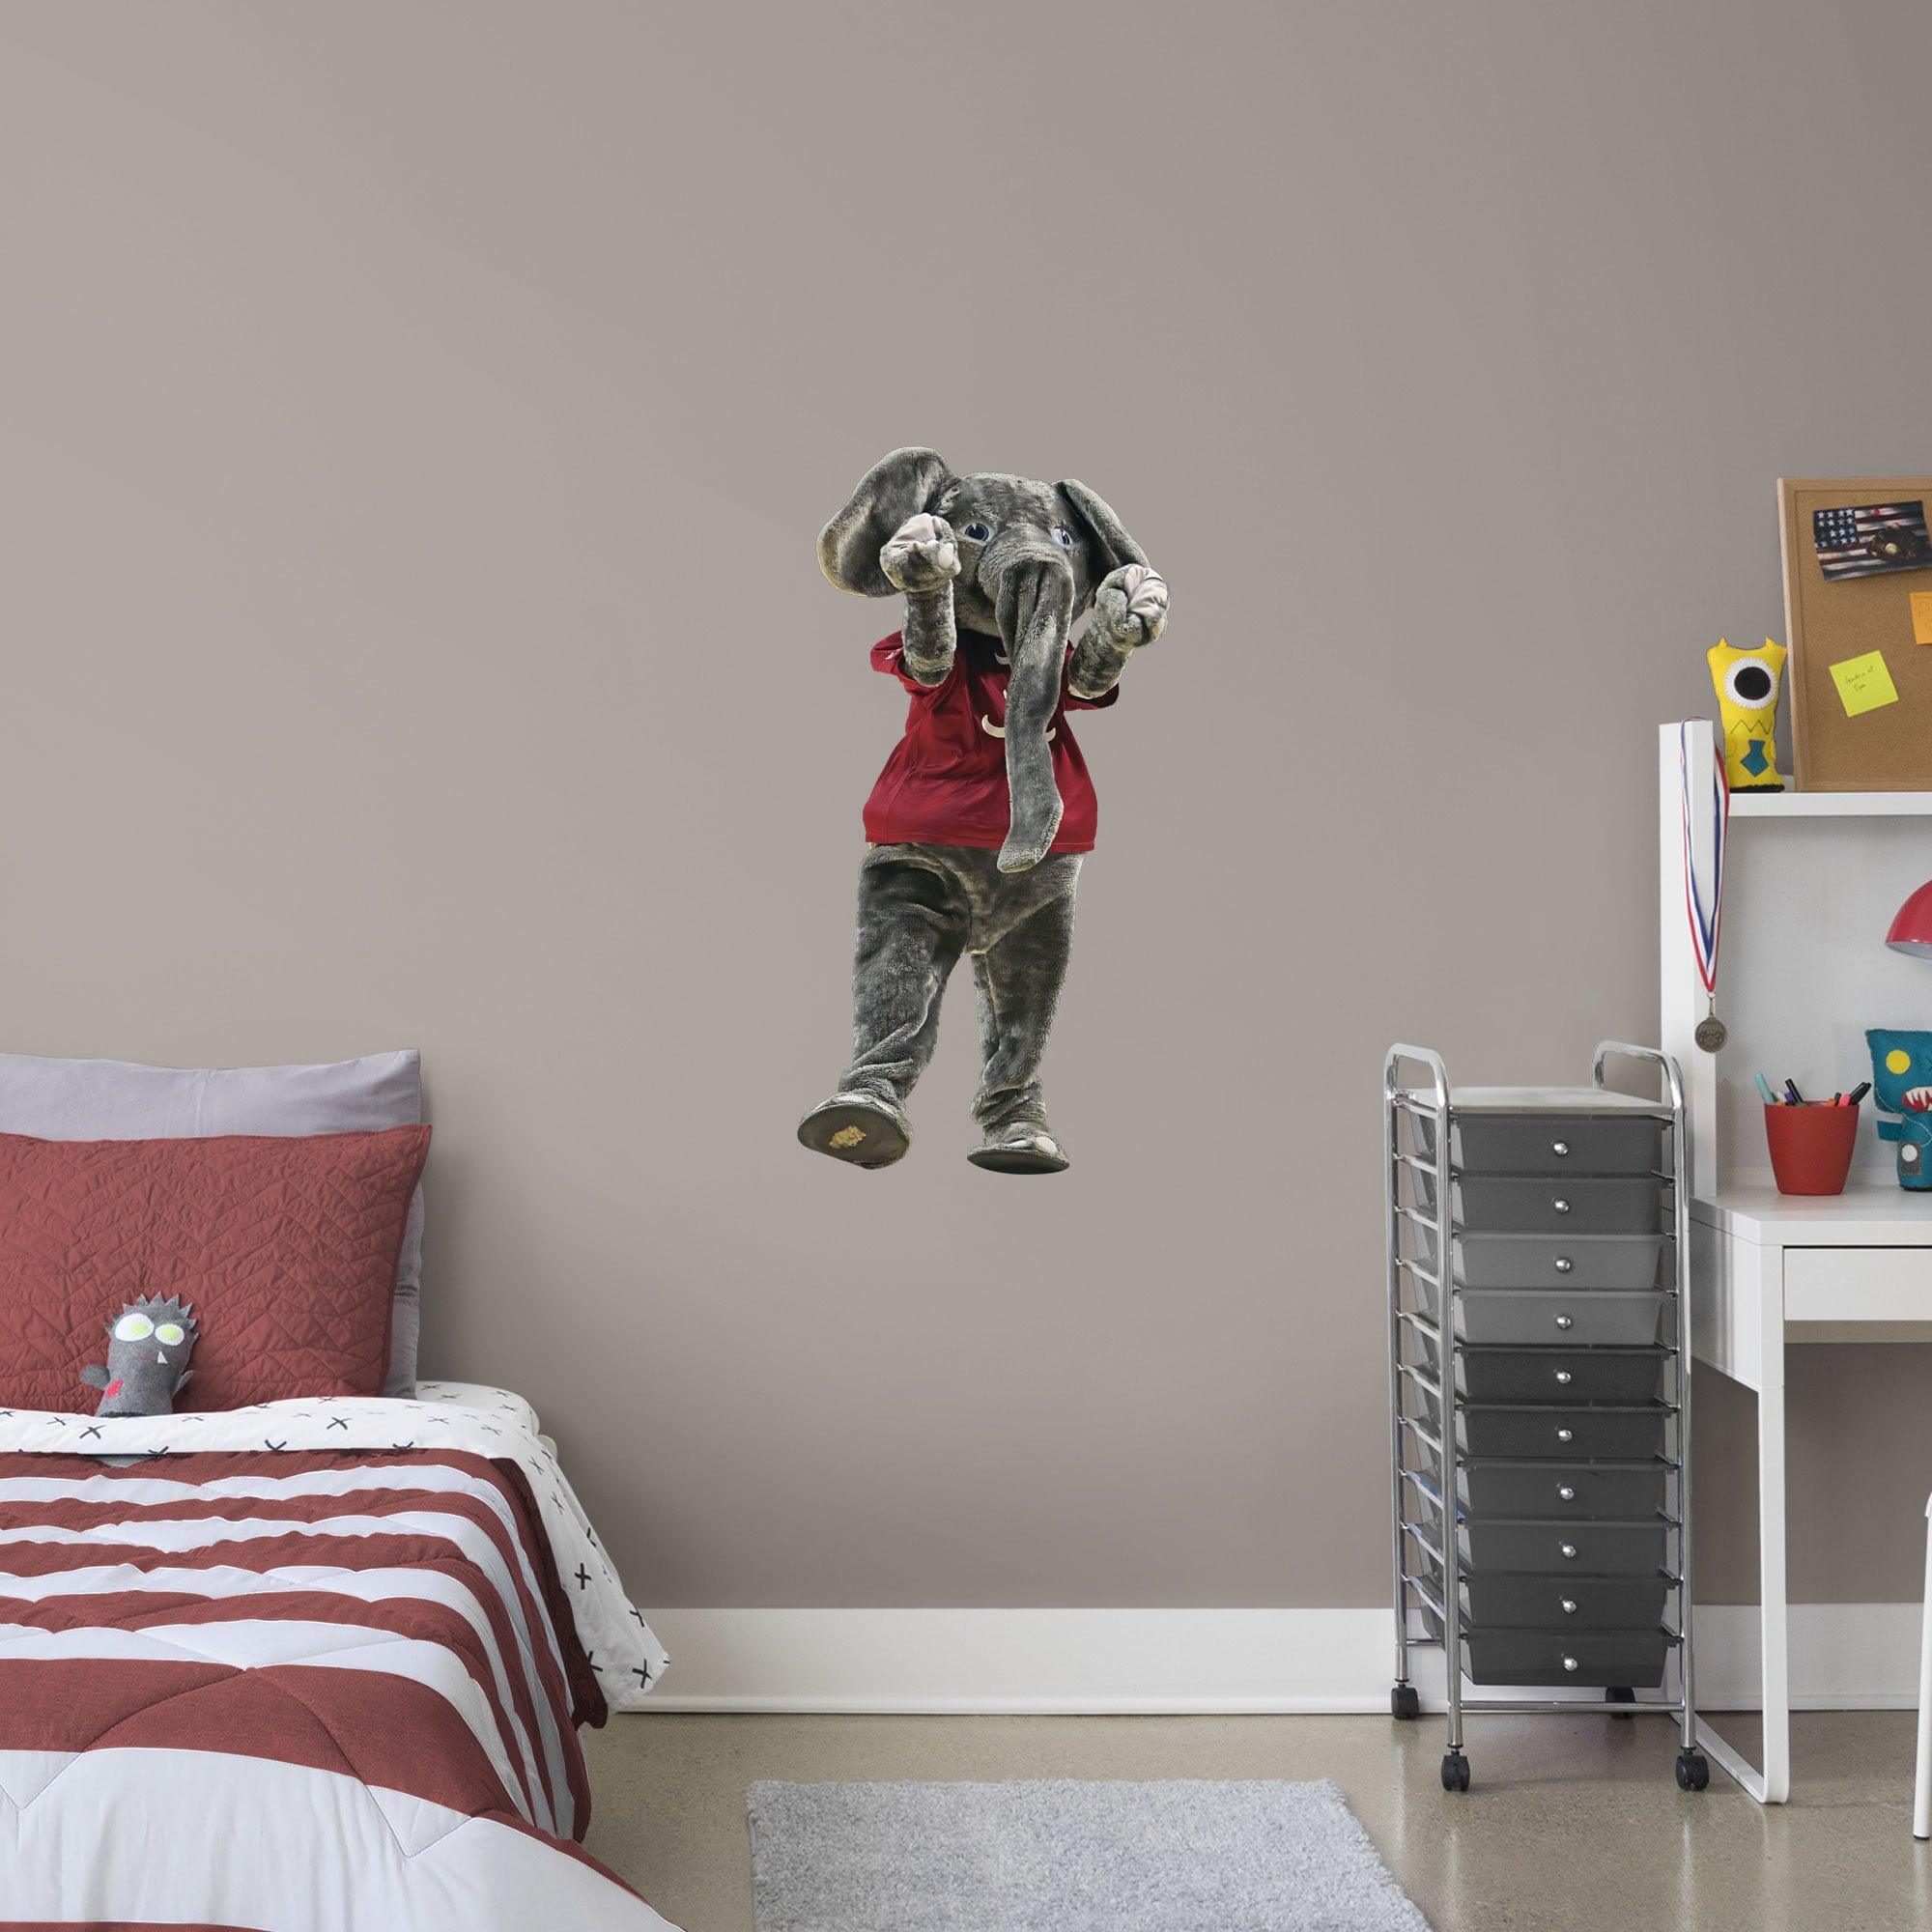 Alabama Crimson Tide: Big Al Mascot - Officially Licensed Removable Wall Decal XL by Fathead | Vinyl